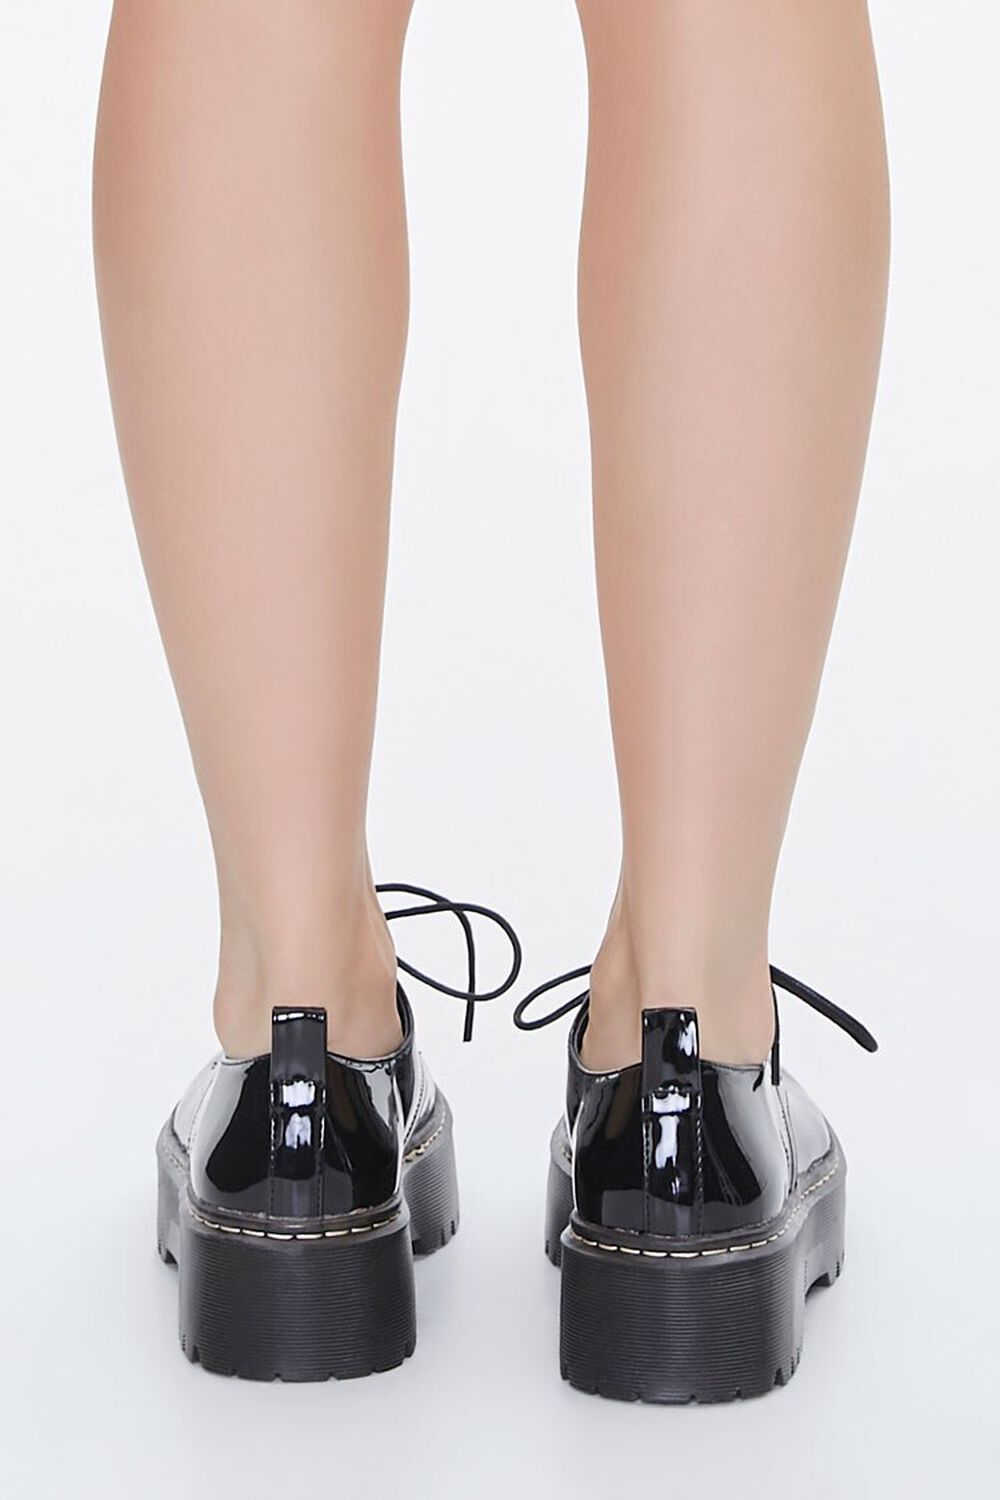 Faux Patent Leather Oxfords, image 3